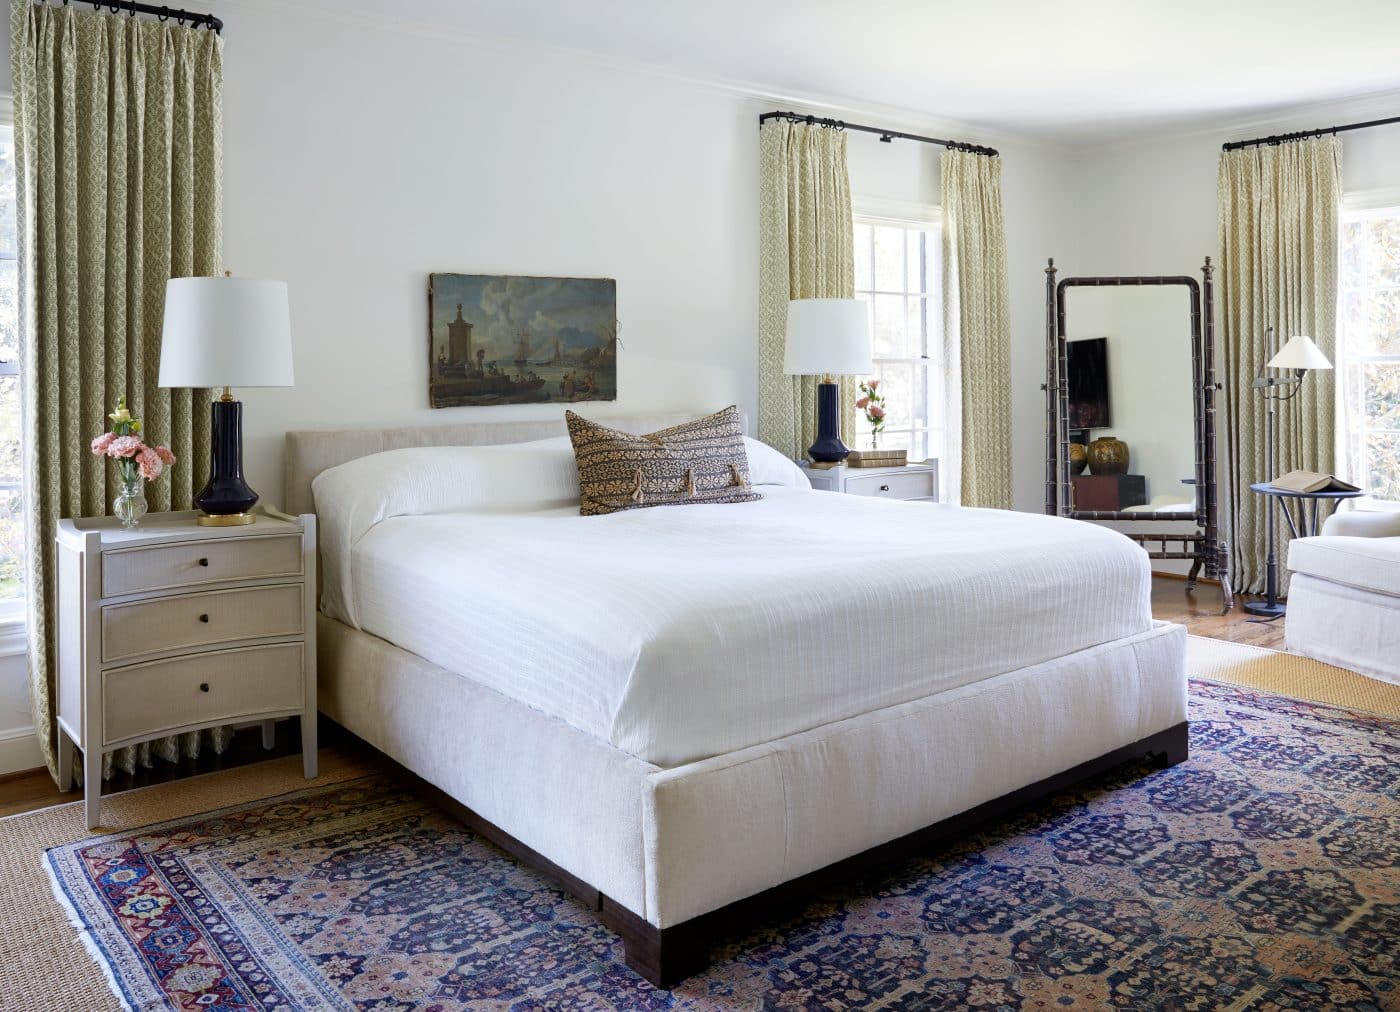 Treasures in this bedroom include an antique textile pillow, 18th-century Italian landscape painting, a vintage bamboo mirror and an antique Agra rug.